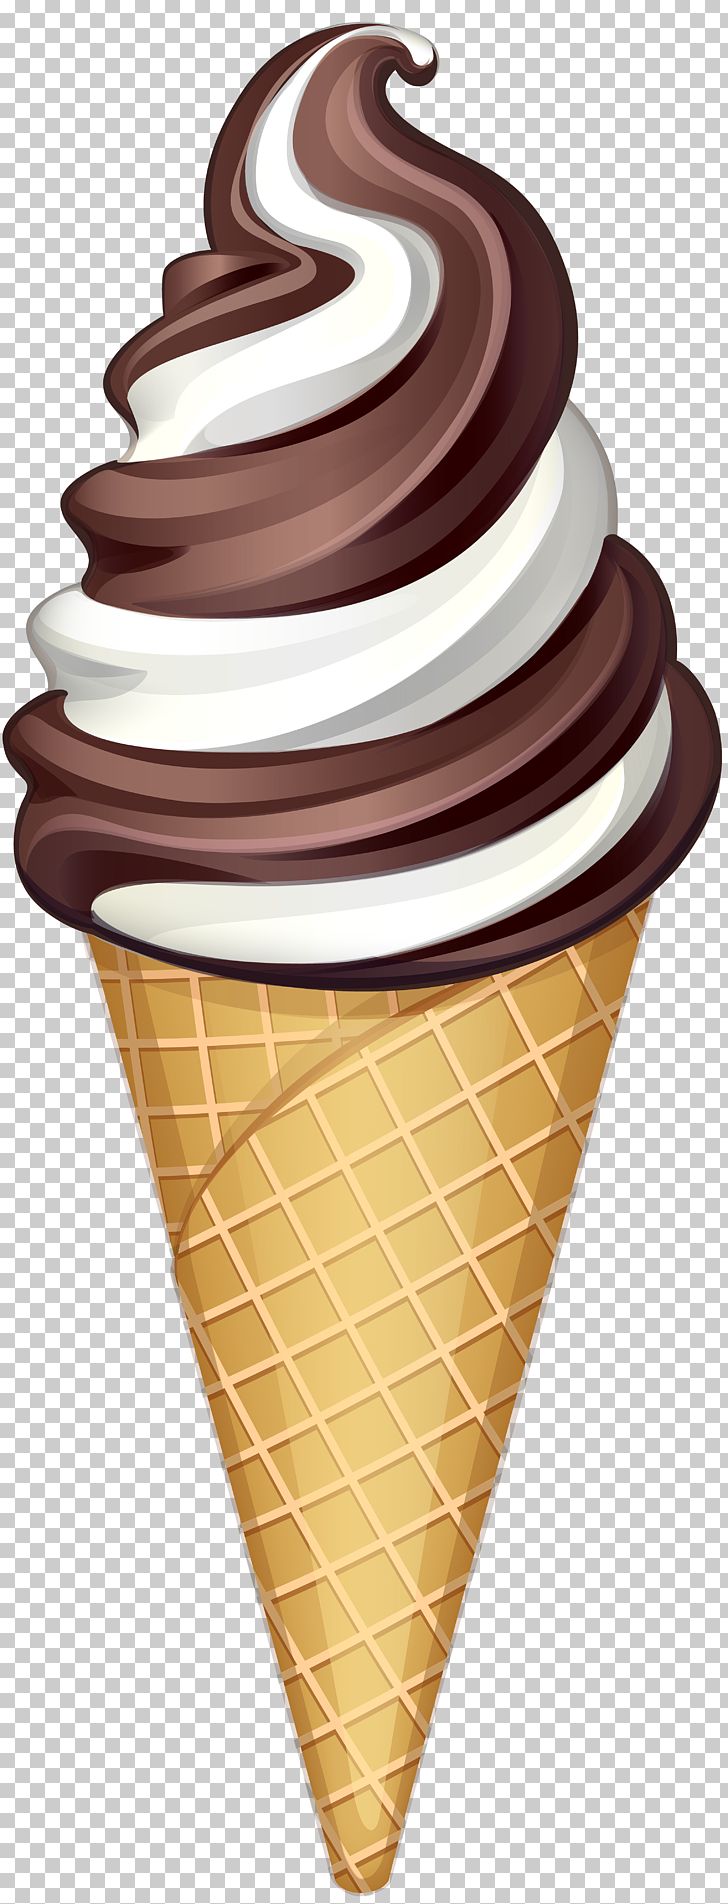 File Formats Lossless Compression PNG, Clipart, Chocolate Ice Cream, Clipart, Clip Art, Cream, Dairy Product Free PNG Download